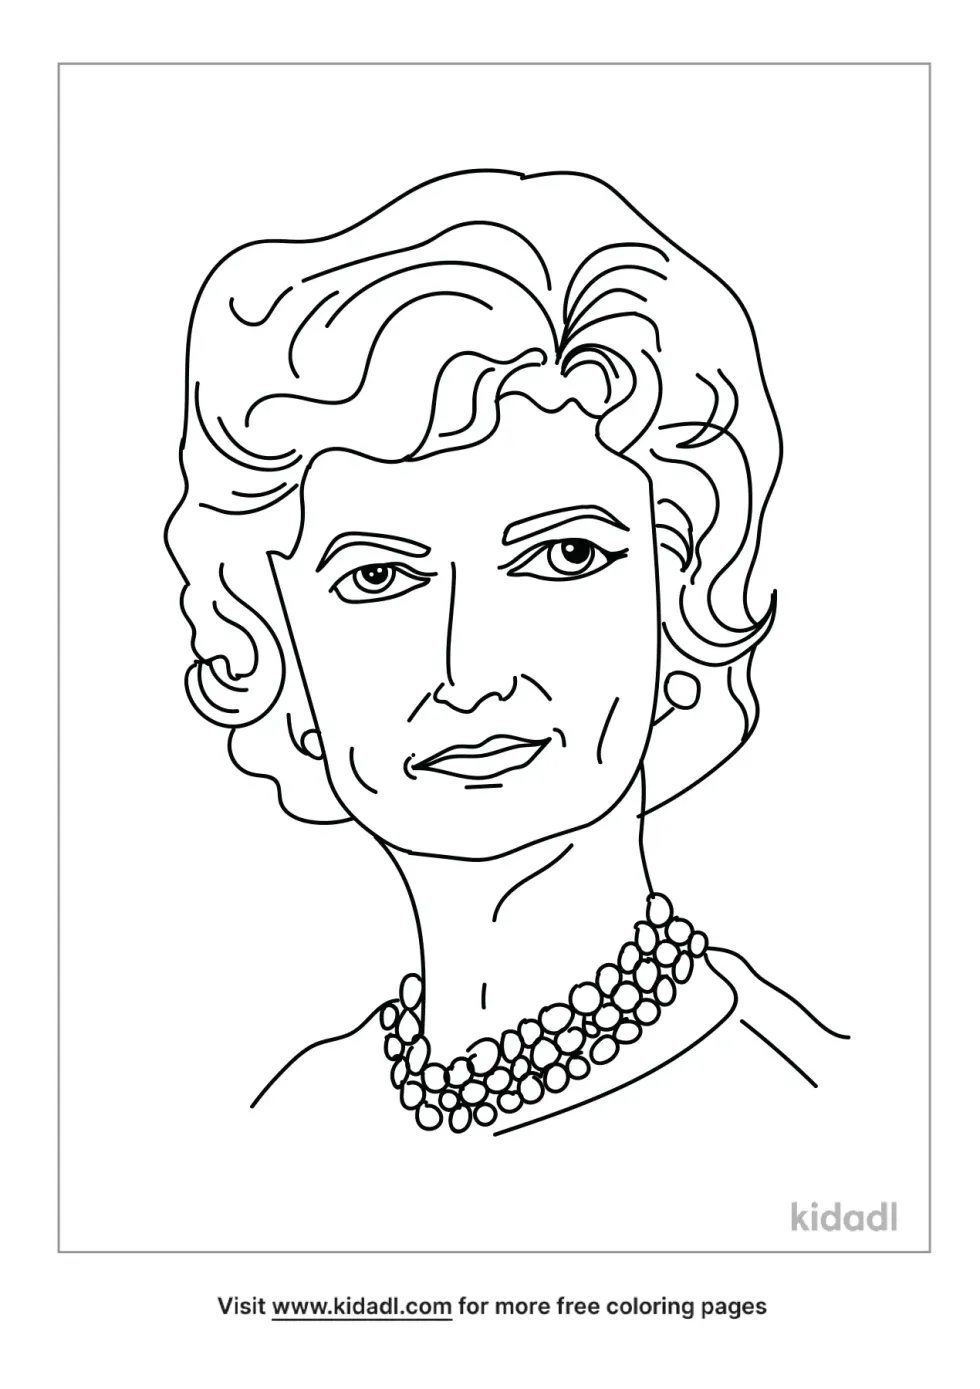 Lady Bird Johnson Coloring Page